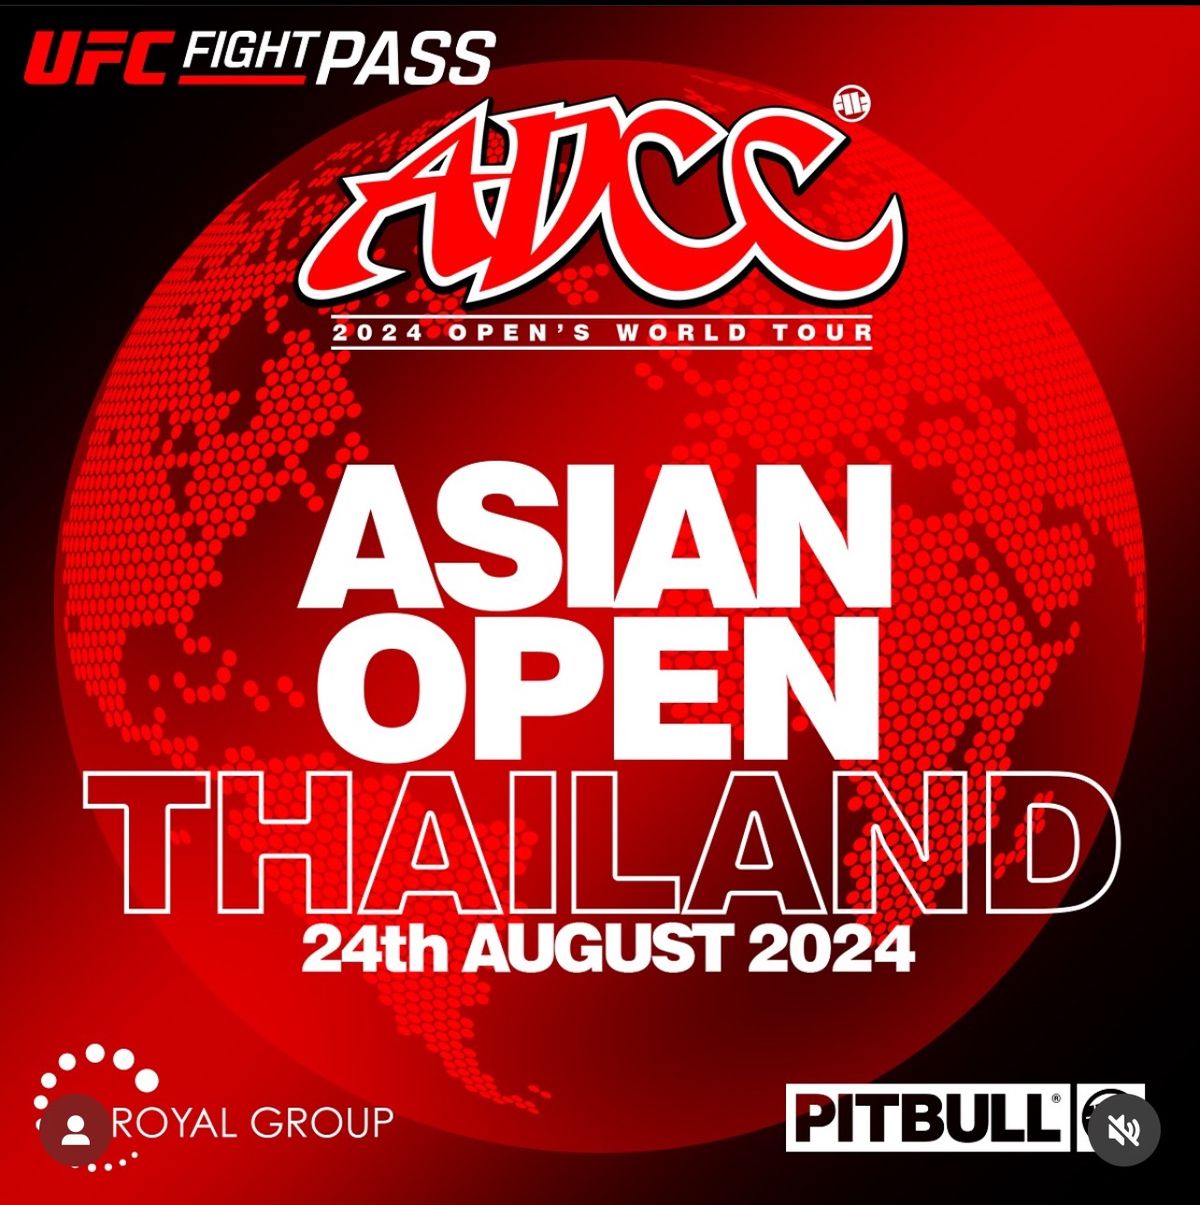 ADCC Asian Open Thailand 